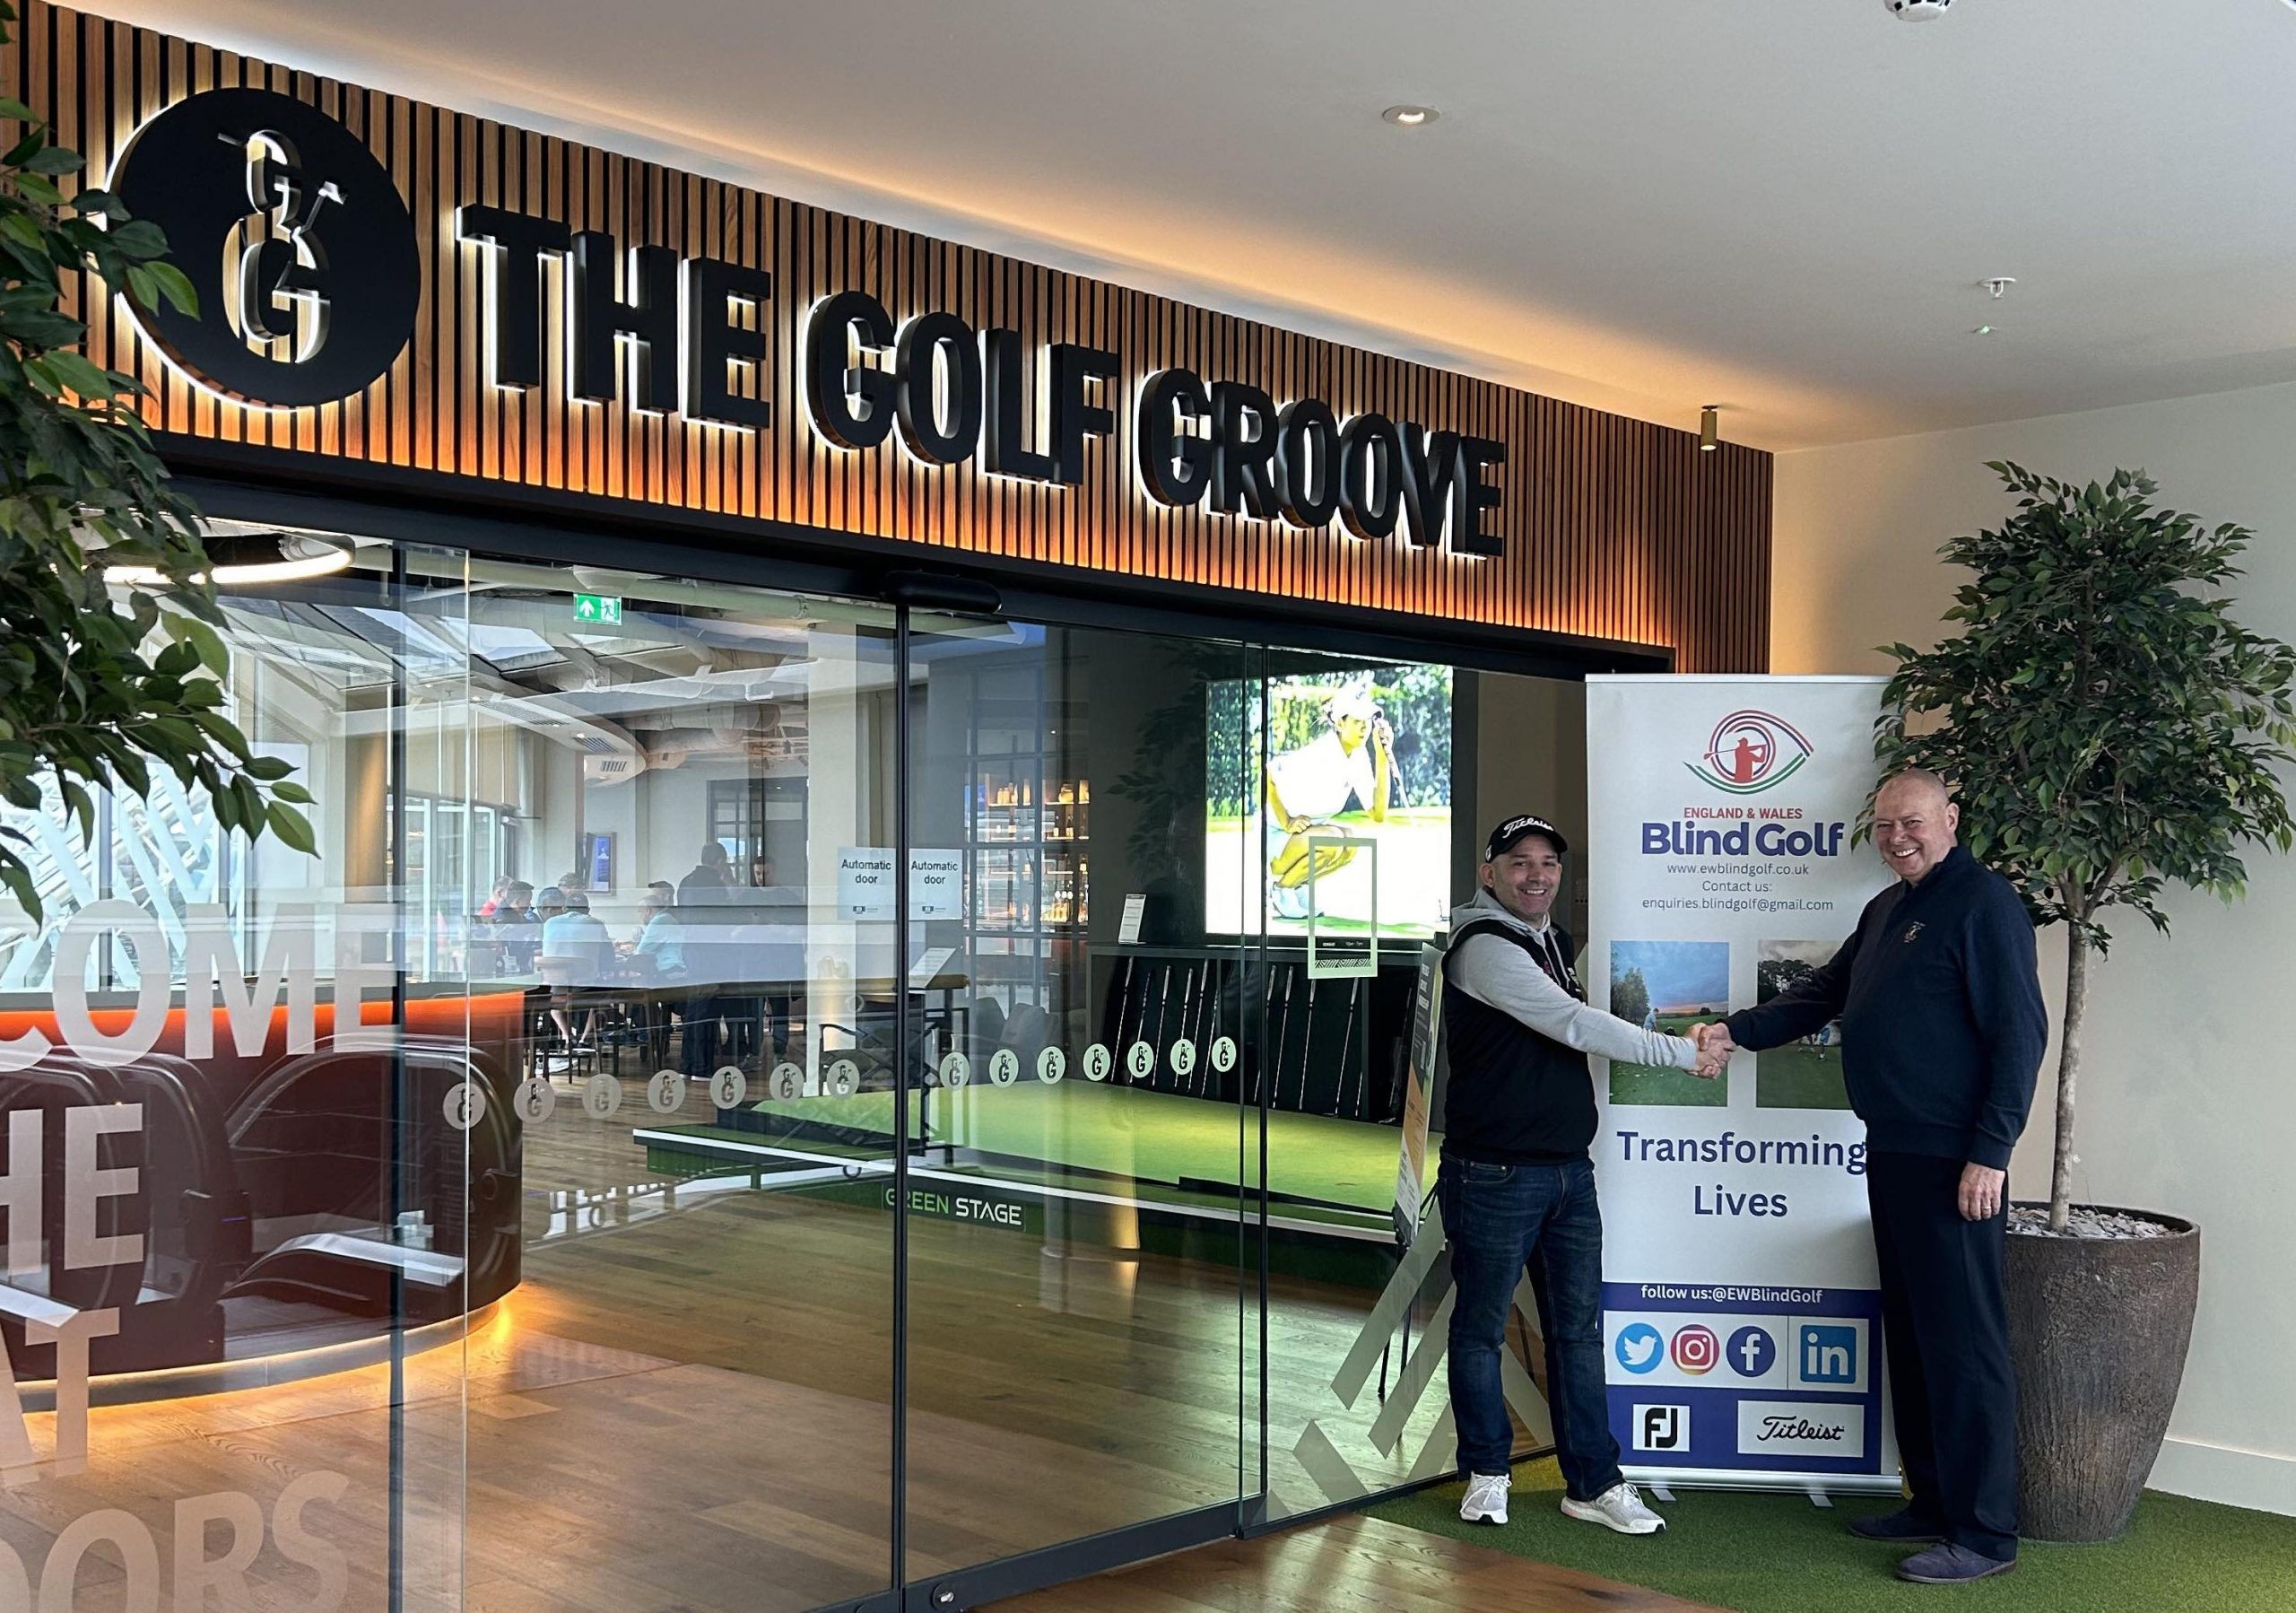 Photo show Andy Gilford and David on the right hand side. They are standing in front go and EWBG Banner and glass doors with Golf Groove written above the doors.